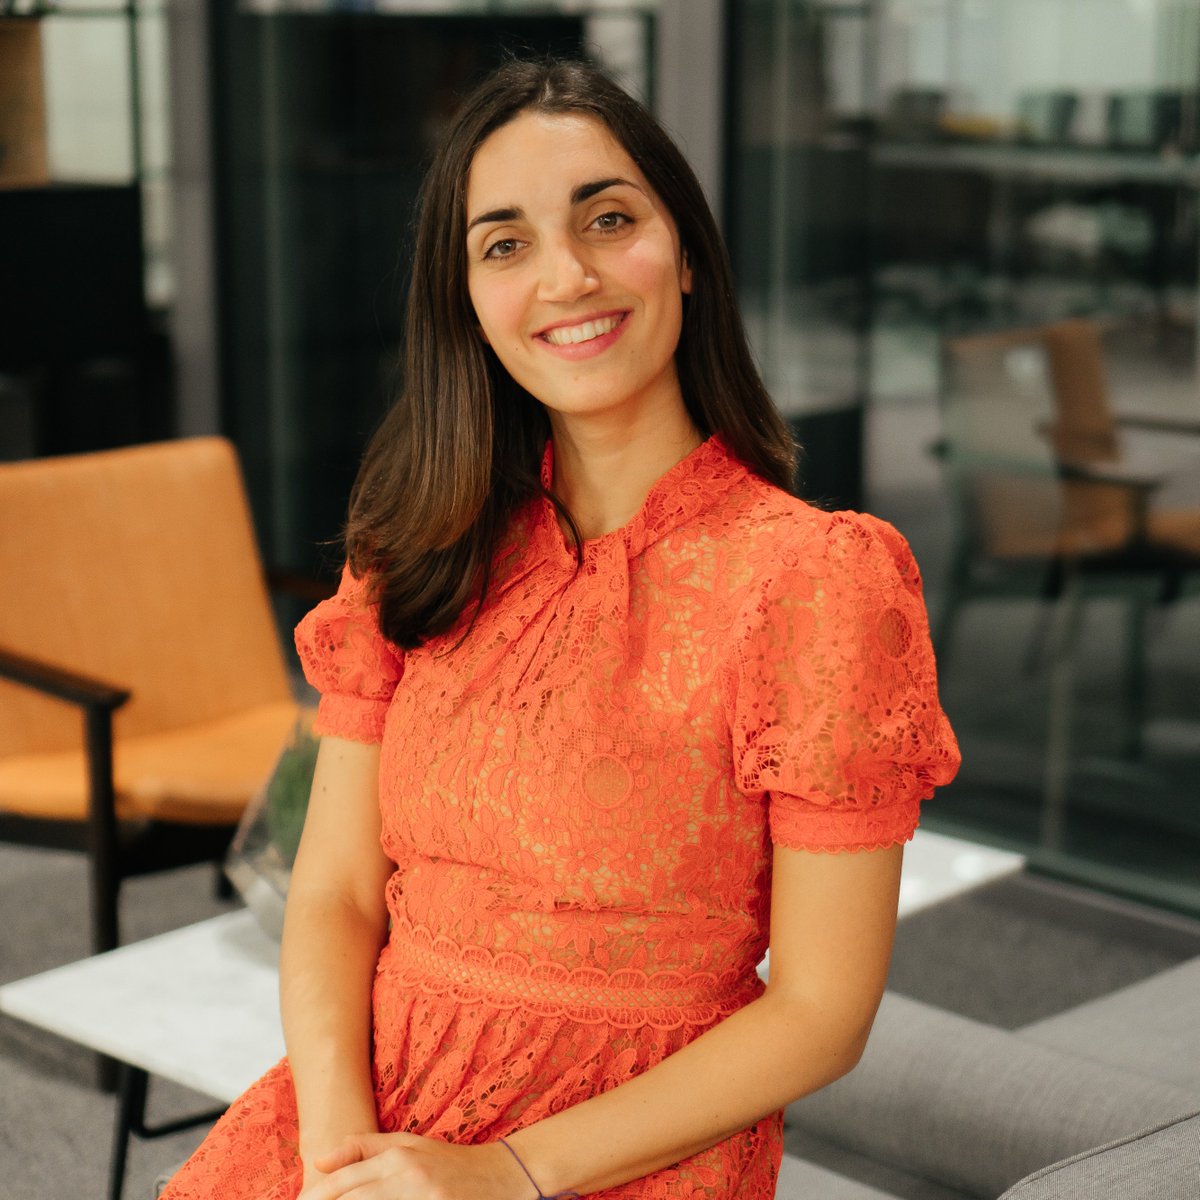 🏆 @Stiliyana_m (Matrix Health and Care) was awarded a grant from @imperialcollege Enterprise Lab’s 'We Innovate' program. Stiliyana was also featured in @StylistMagazine, gaining recognition for her revolutionary adaptation of the speculum. #WomensHealth